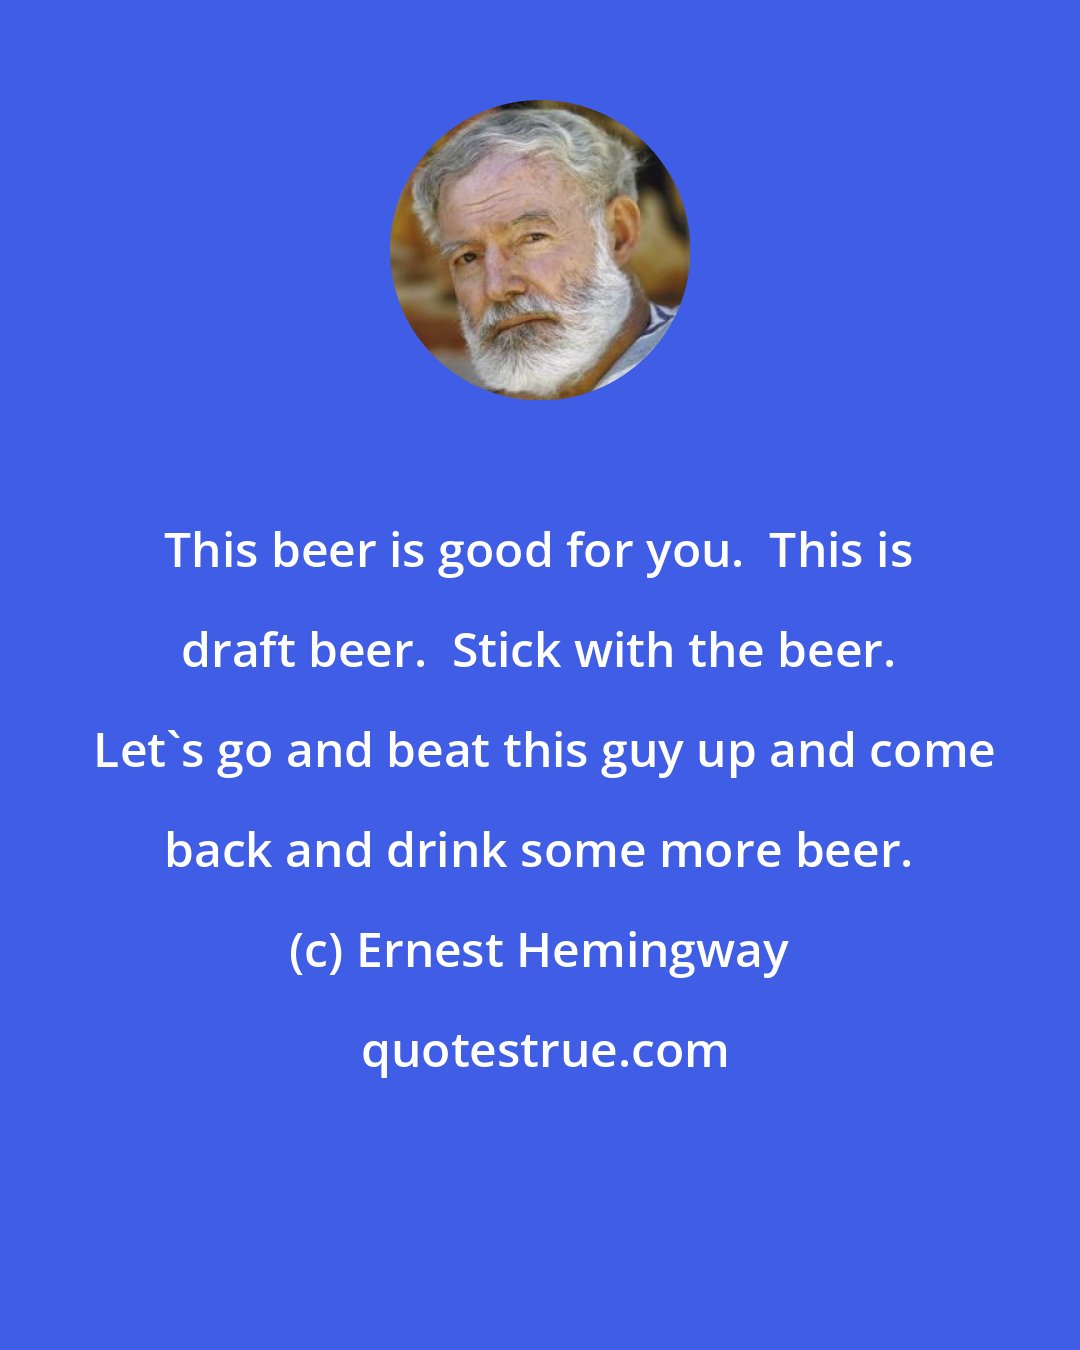 Ernest Hemingway: This beer is good for you.  This is draft beer.  Stick with the beer.  Let's go and beat this guy up and come back and drink some more beer.